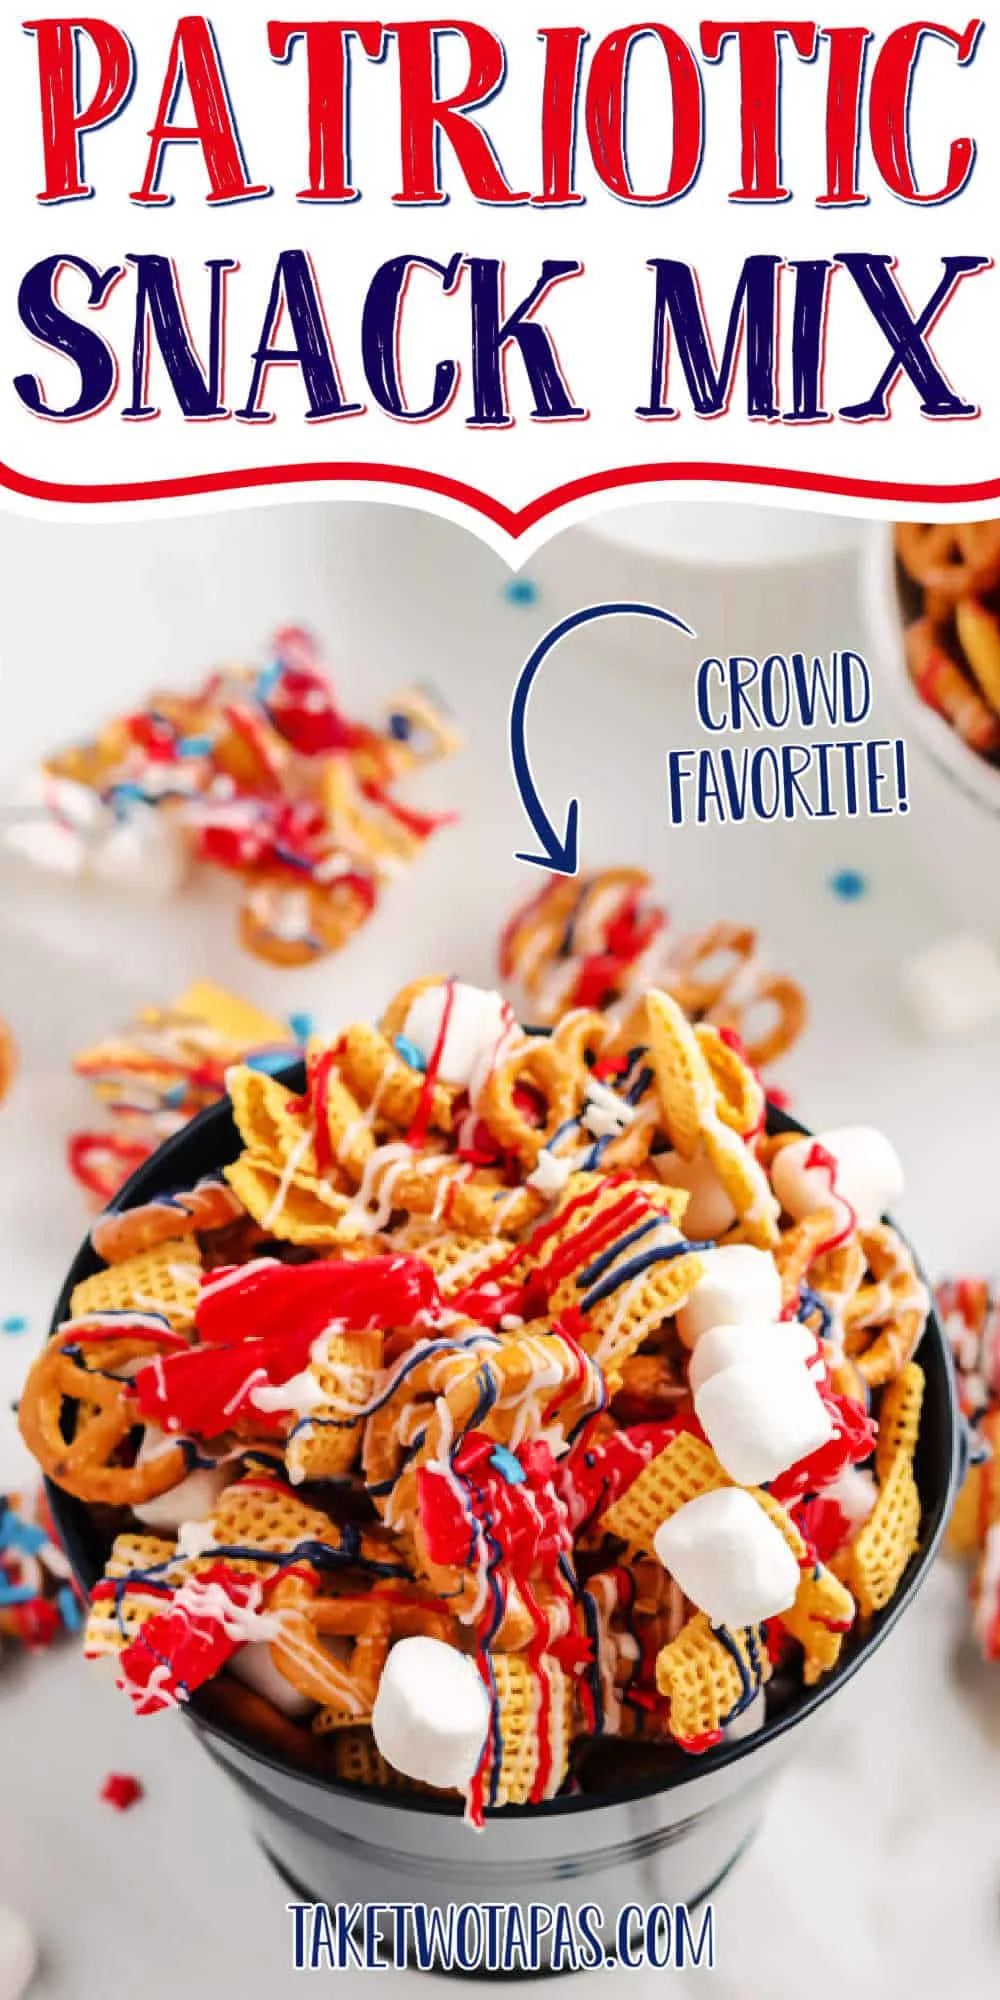 pail of snack mix with text "patriotic snack mix"